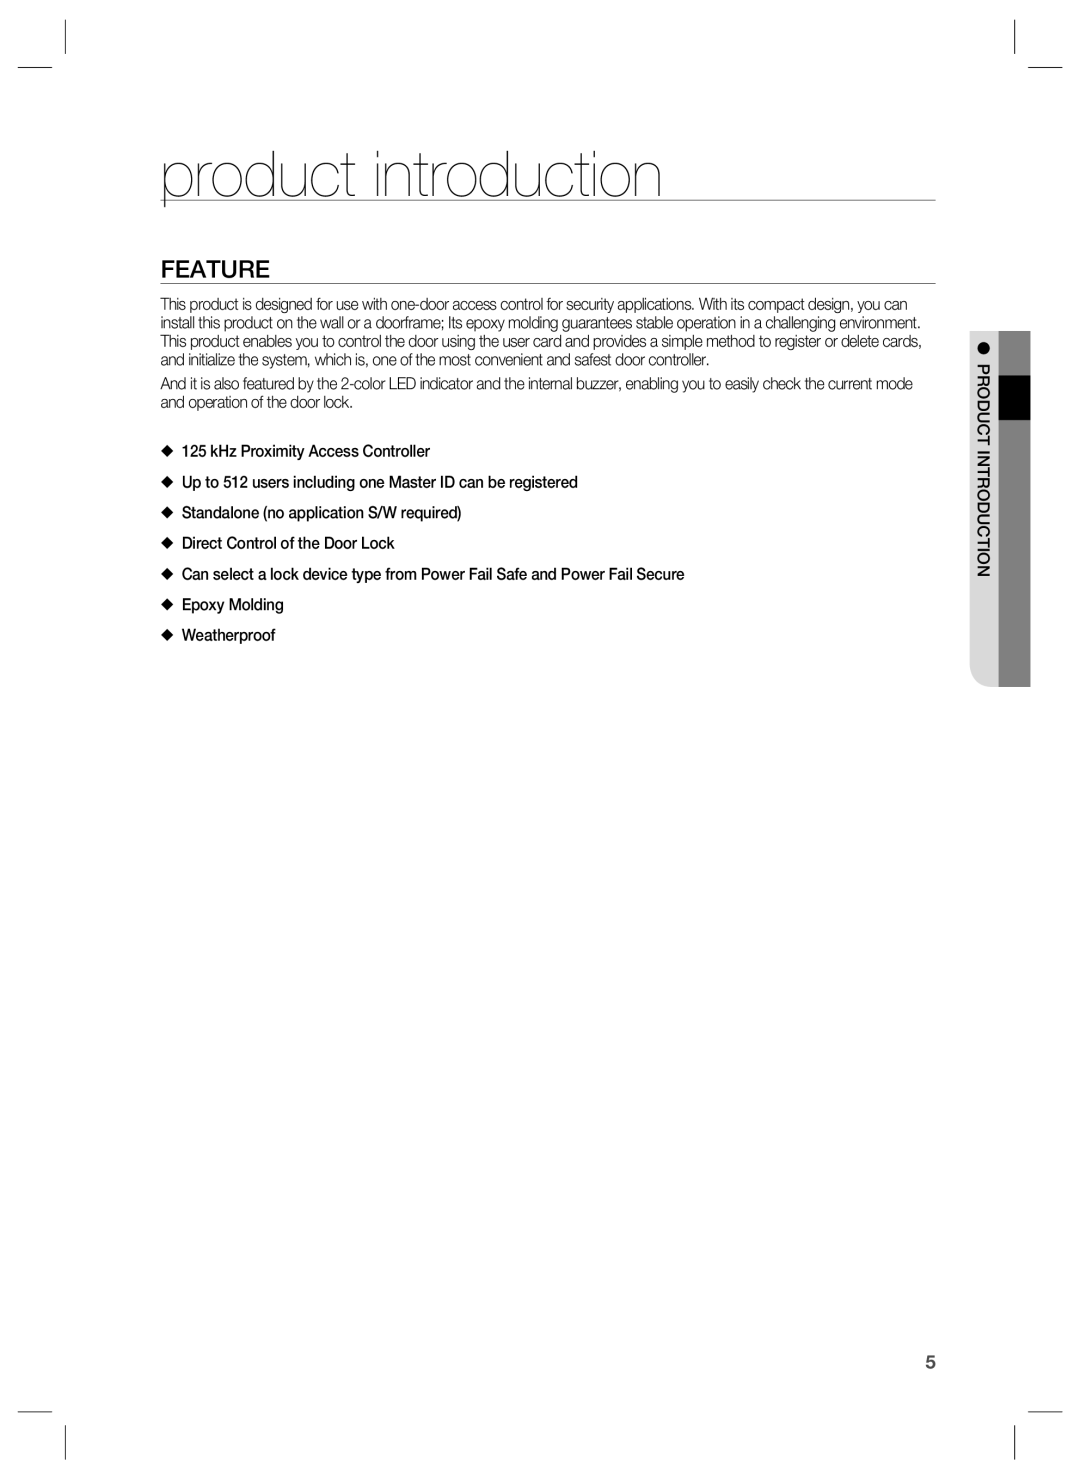 Samsung SSA-S1000 user manual product introduction, Feature 